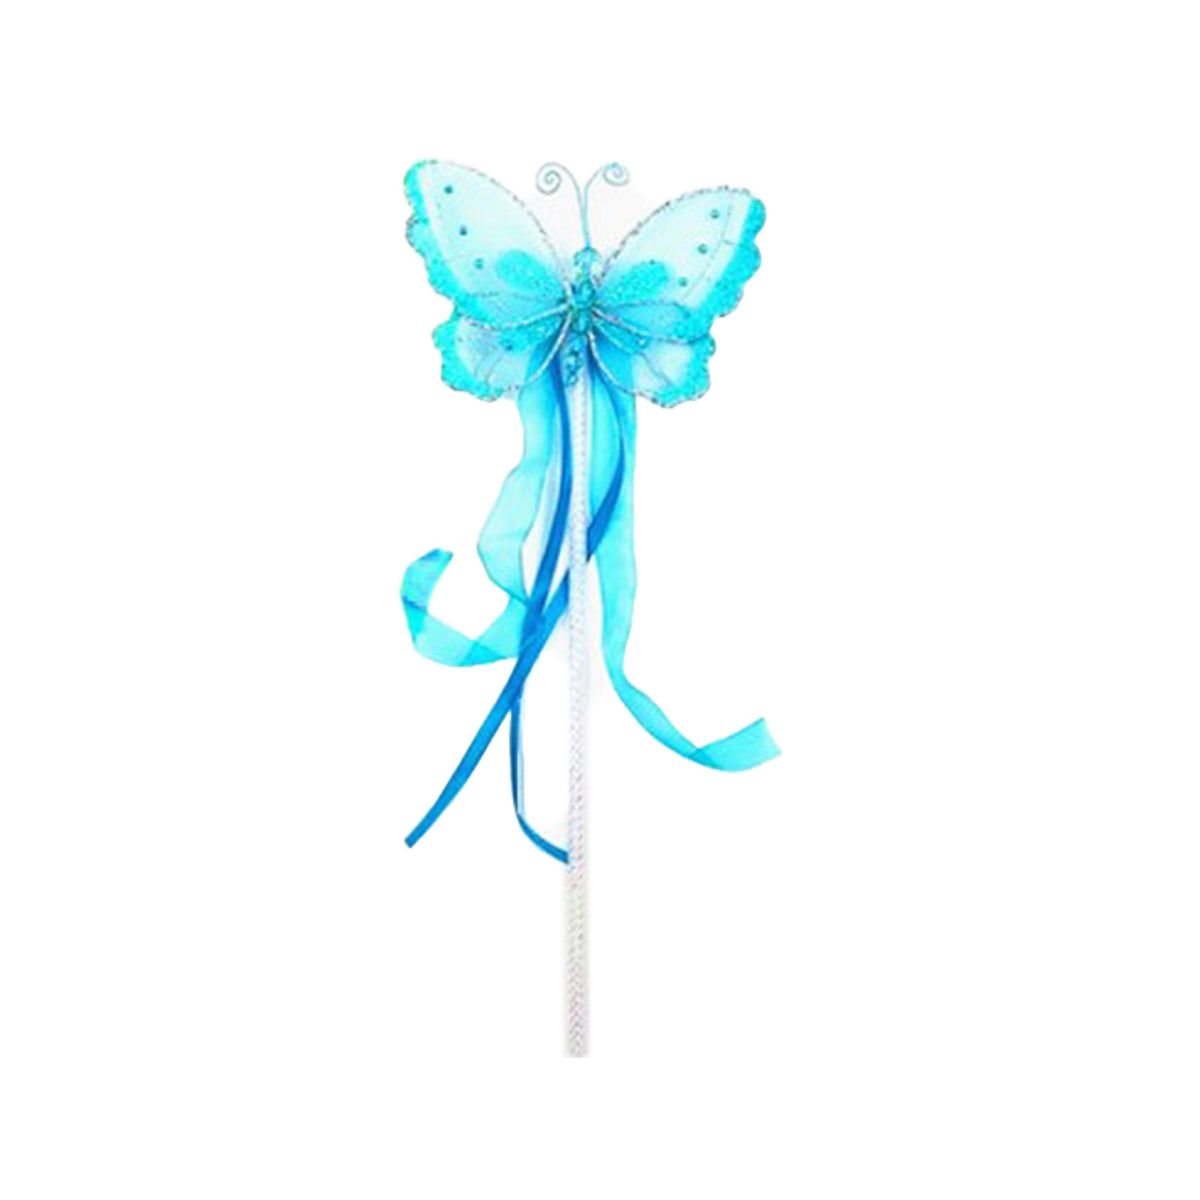 IVY TRADING INC. Costume Accessories Blue Butterfly Fairy Wand, 5.5 Inches, 1 Count 8336572931636